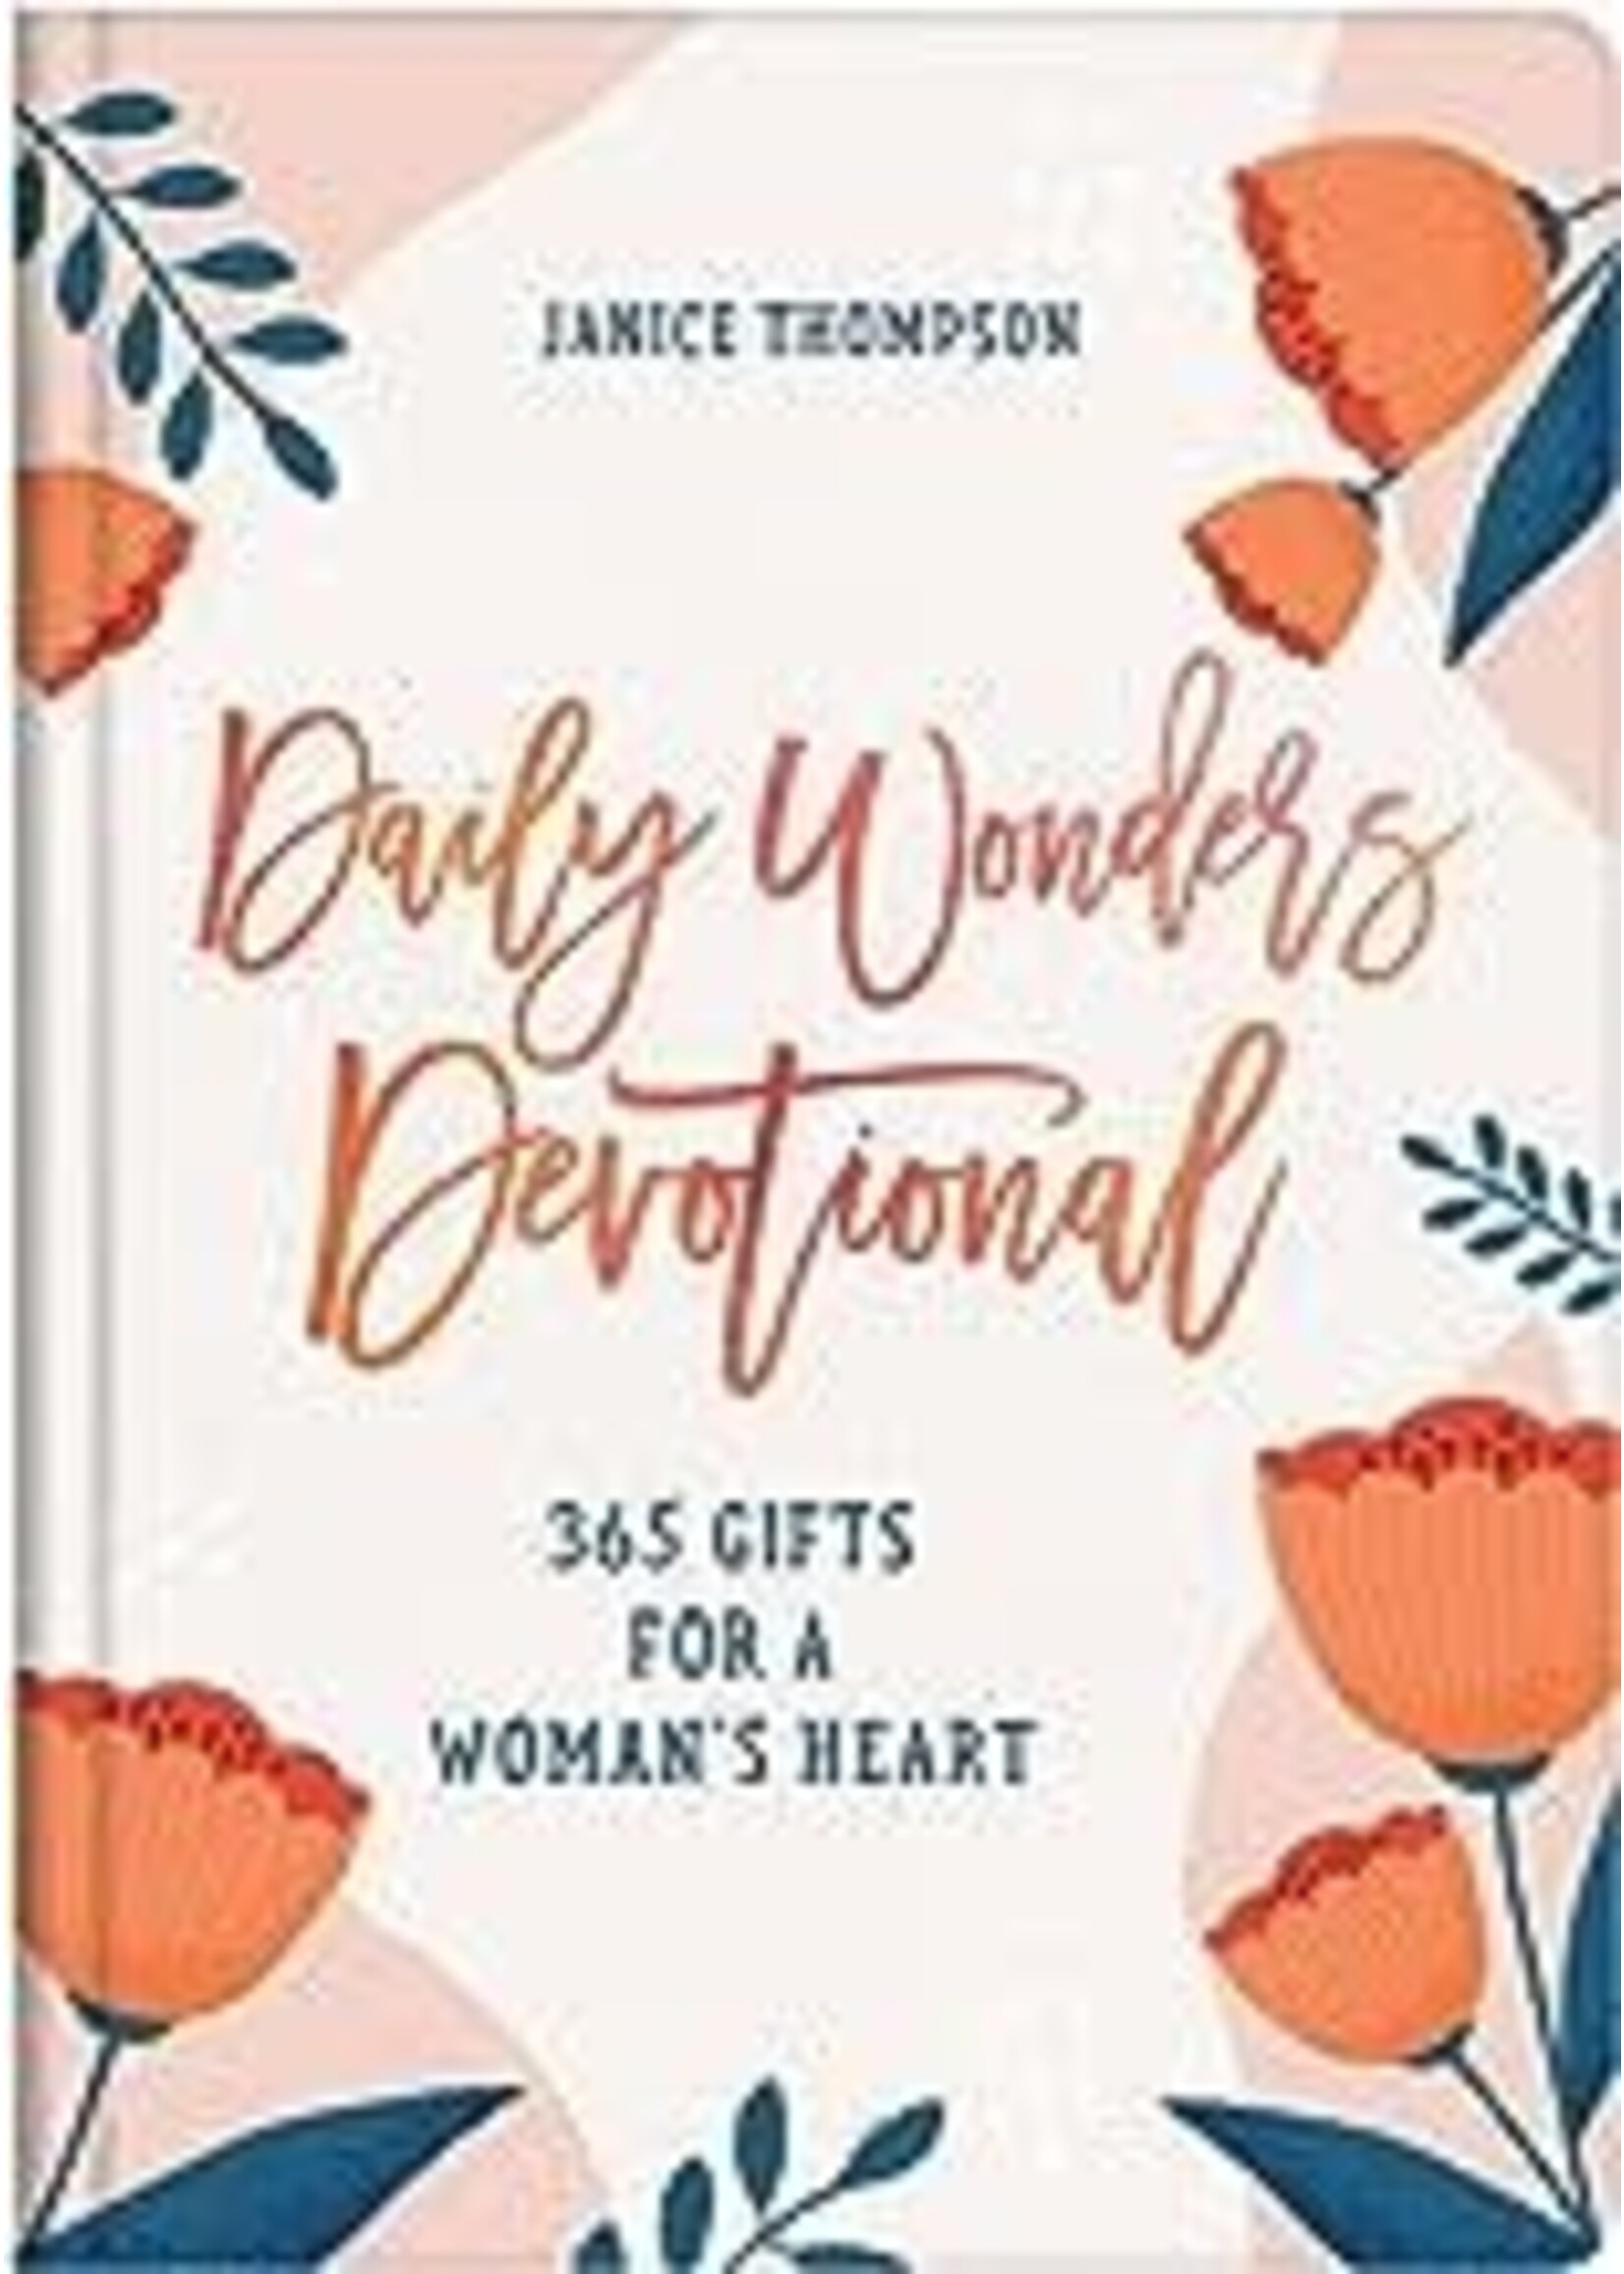 Daily wonders Devotional 365 Gifts for a Woman's Heart